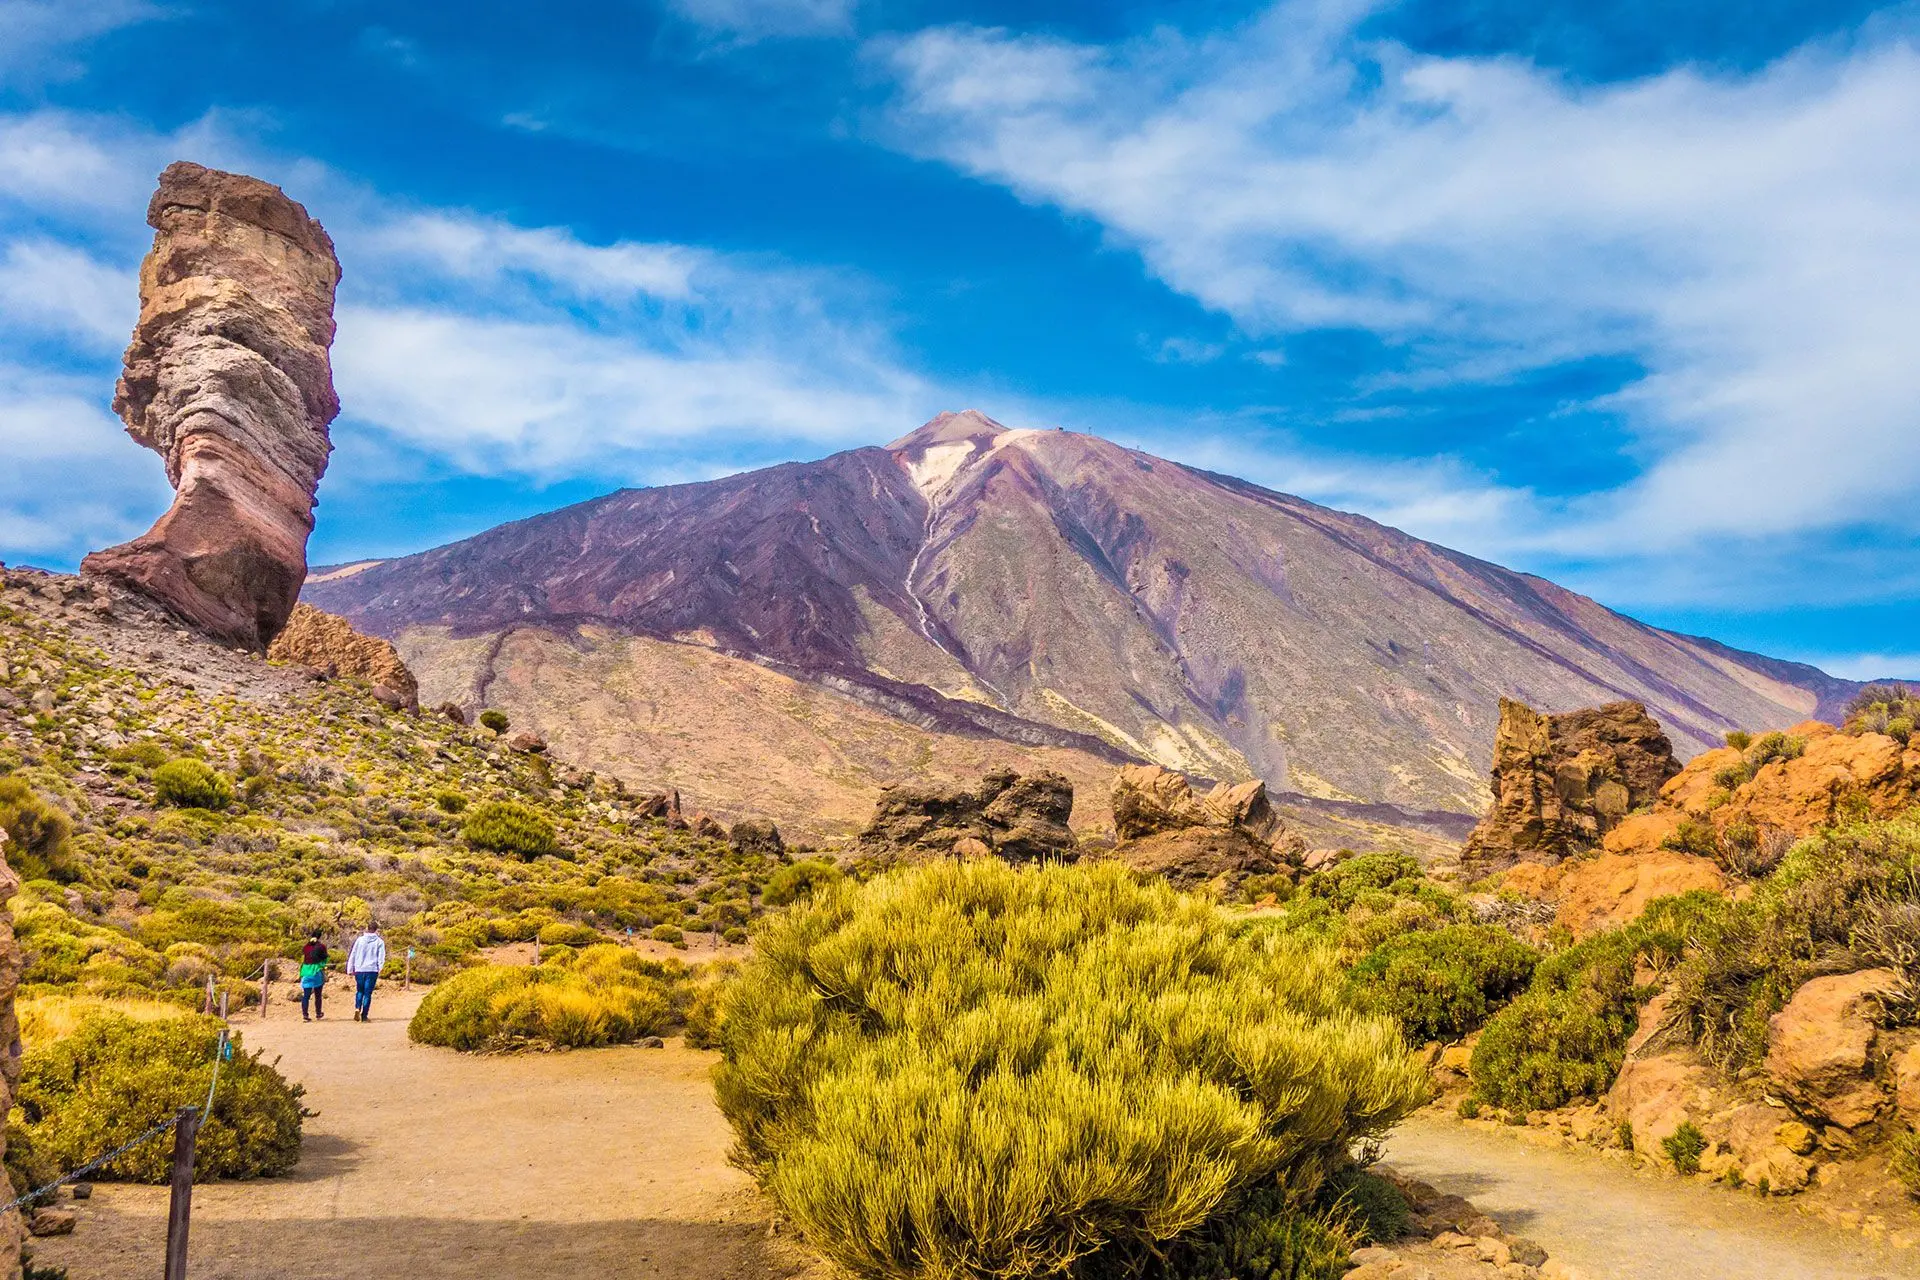 The most popular excursions in Tenerife